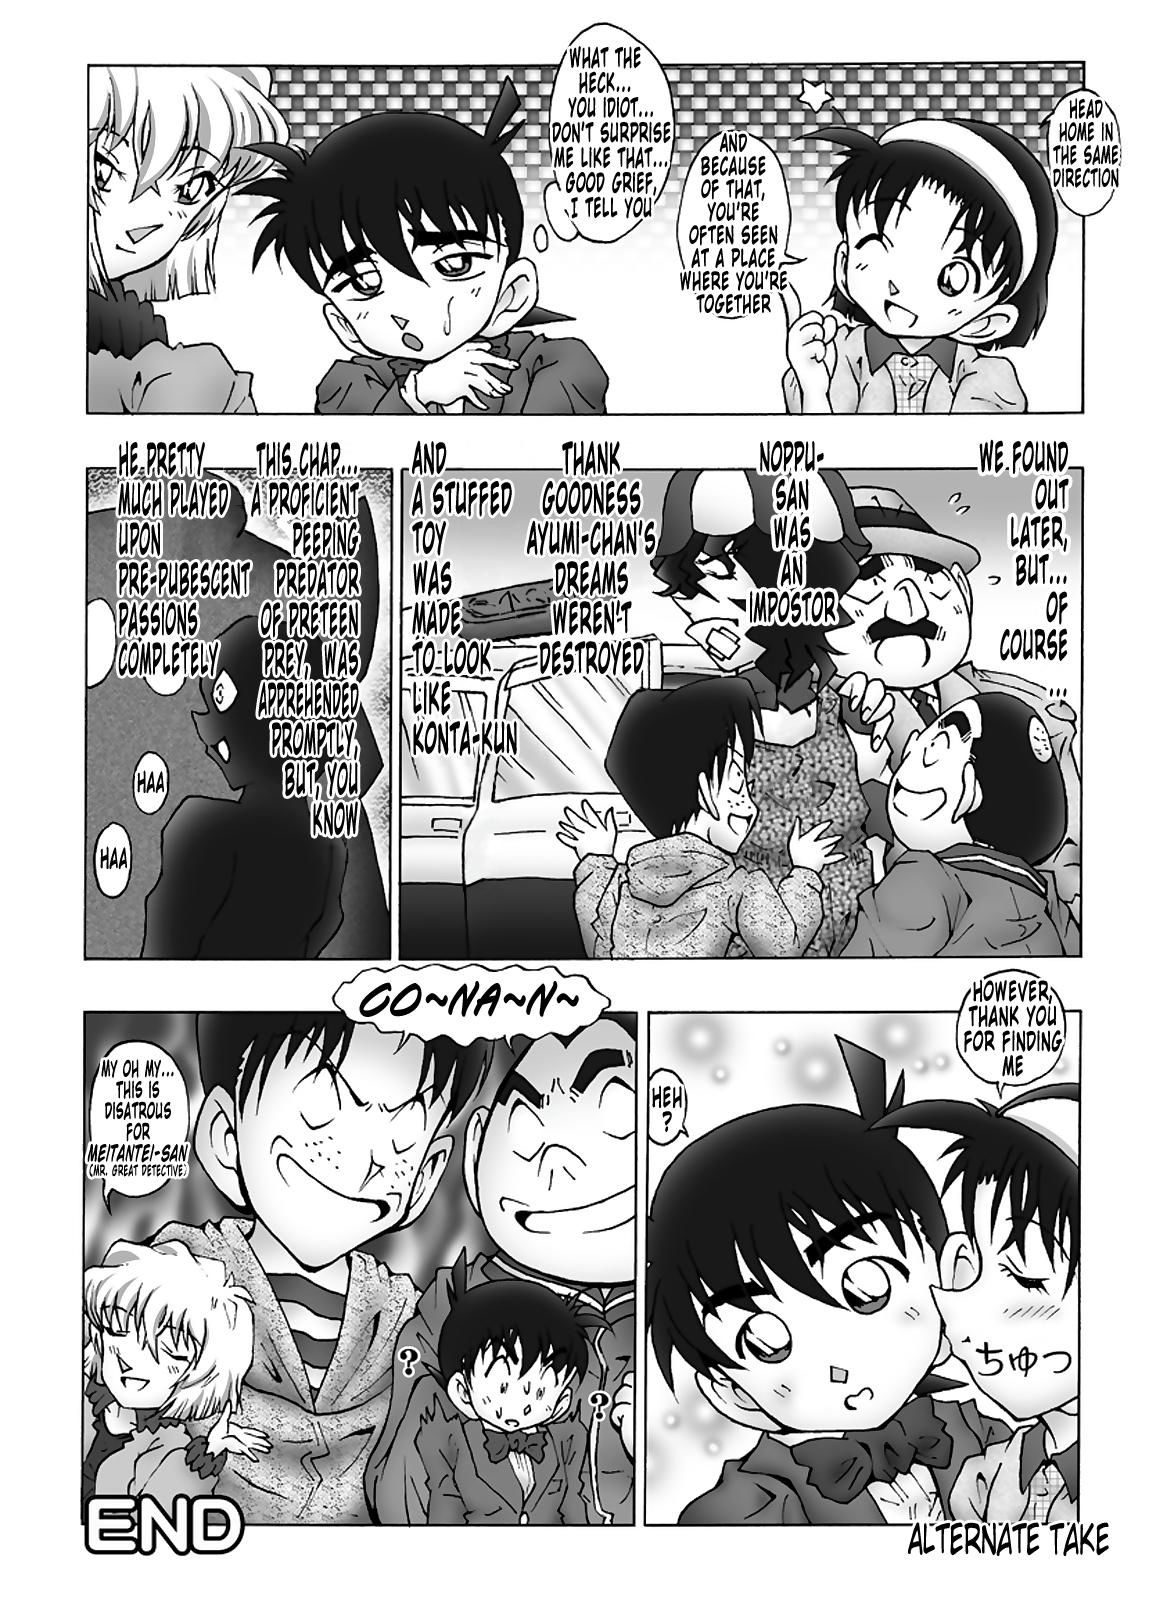 Bumbling Detective Conan - File 11: The Mystery Of Jack The Ripper's True Identity 23